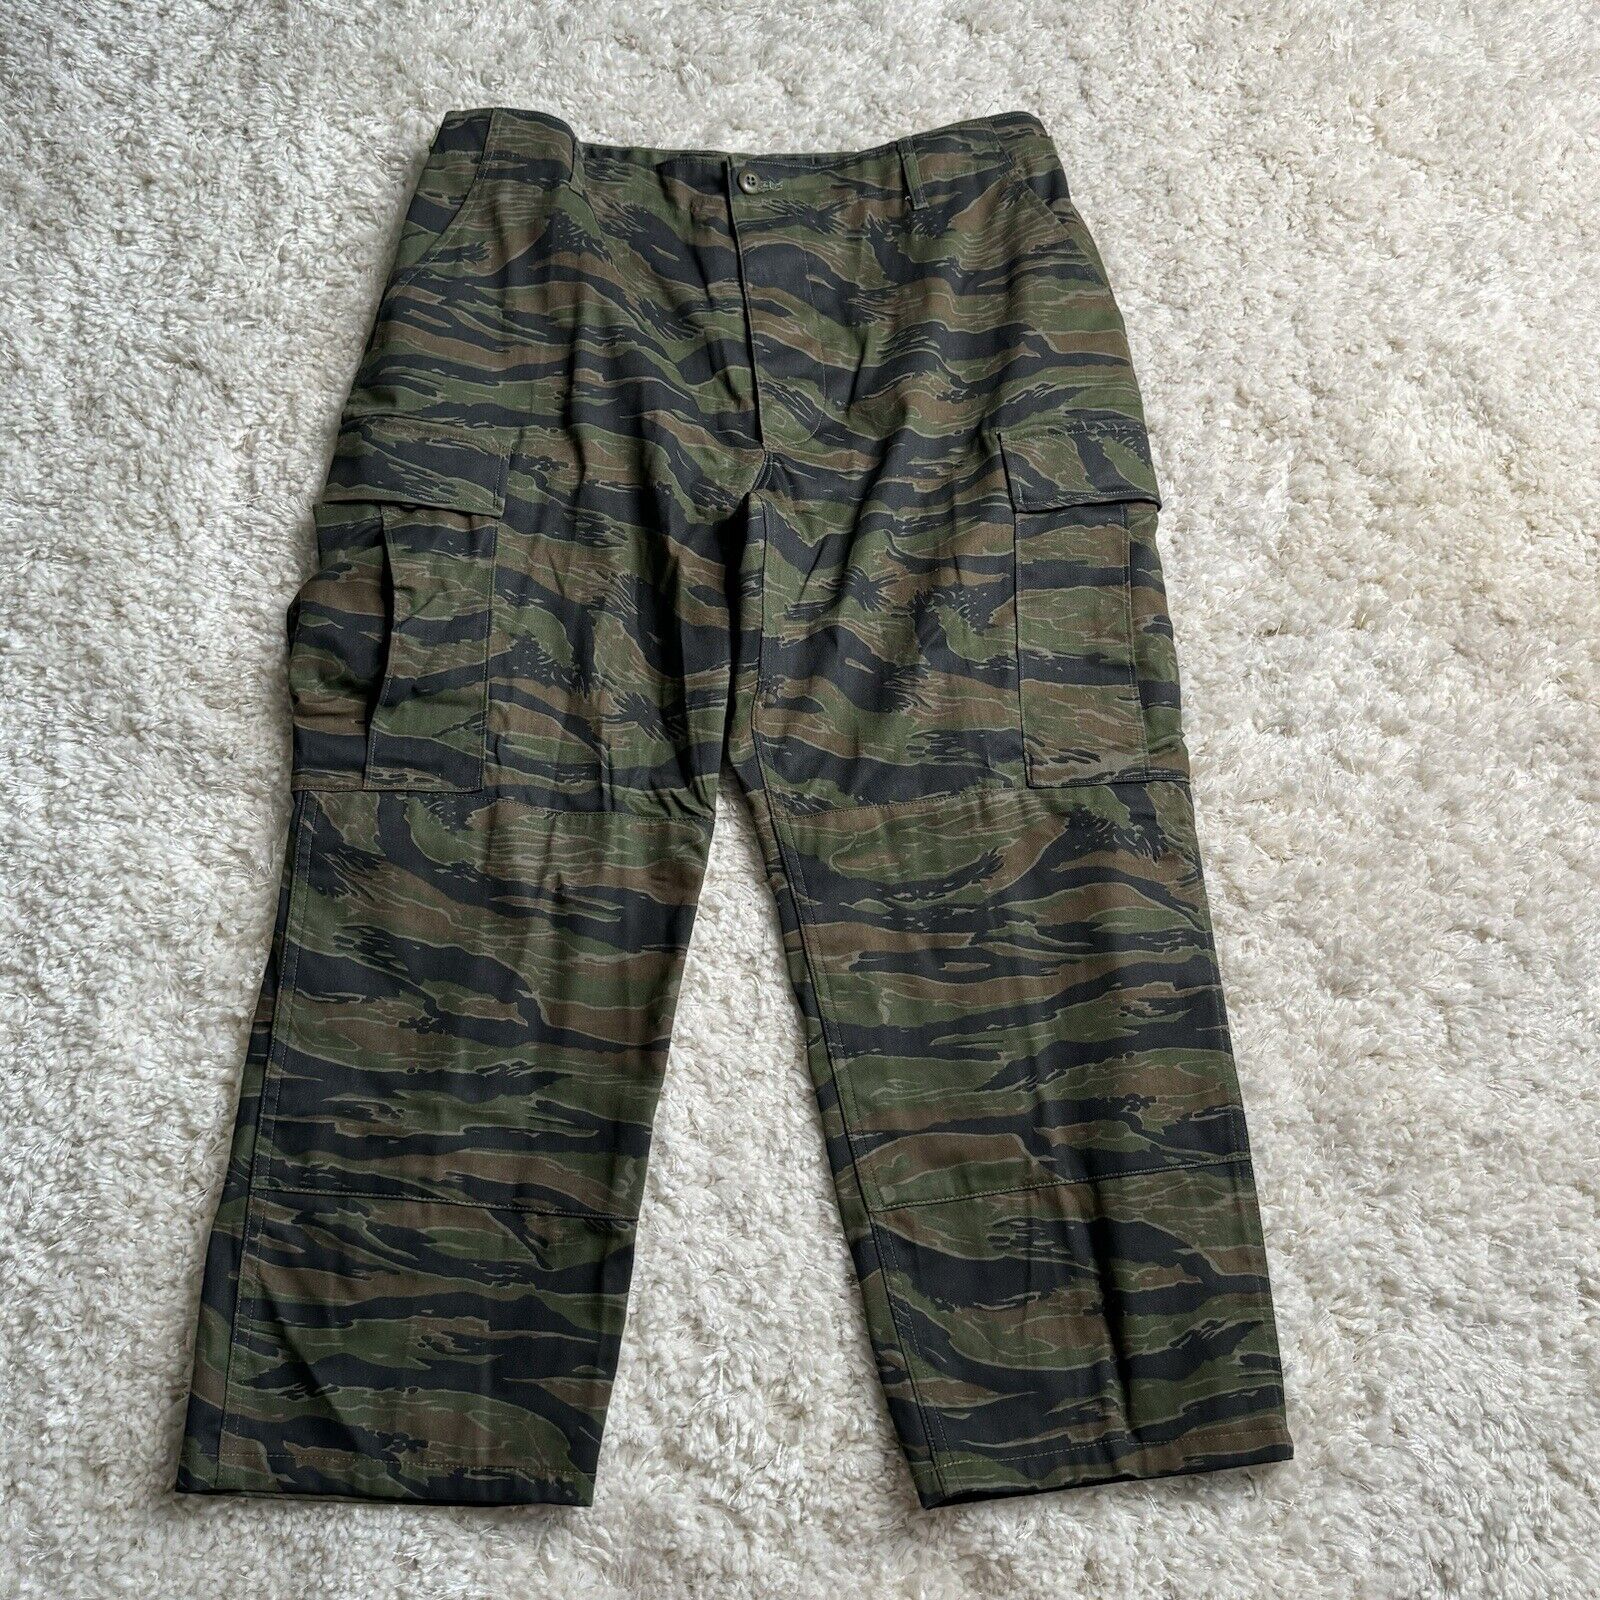 Propper Combat Trousers Mens Large Tiger Stripe Camouflage Adjustable Military